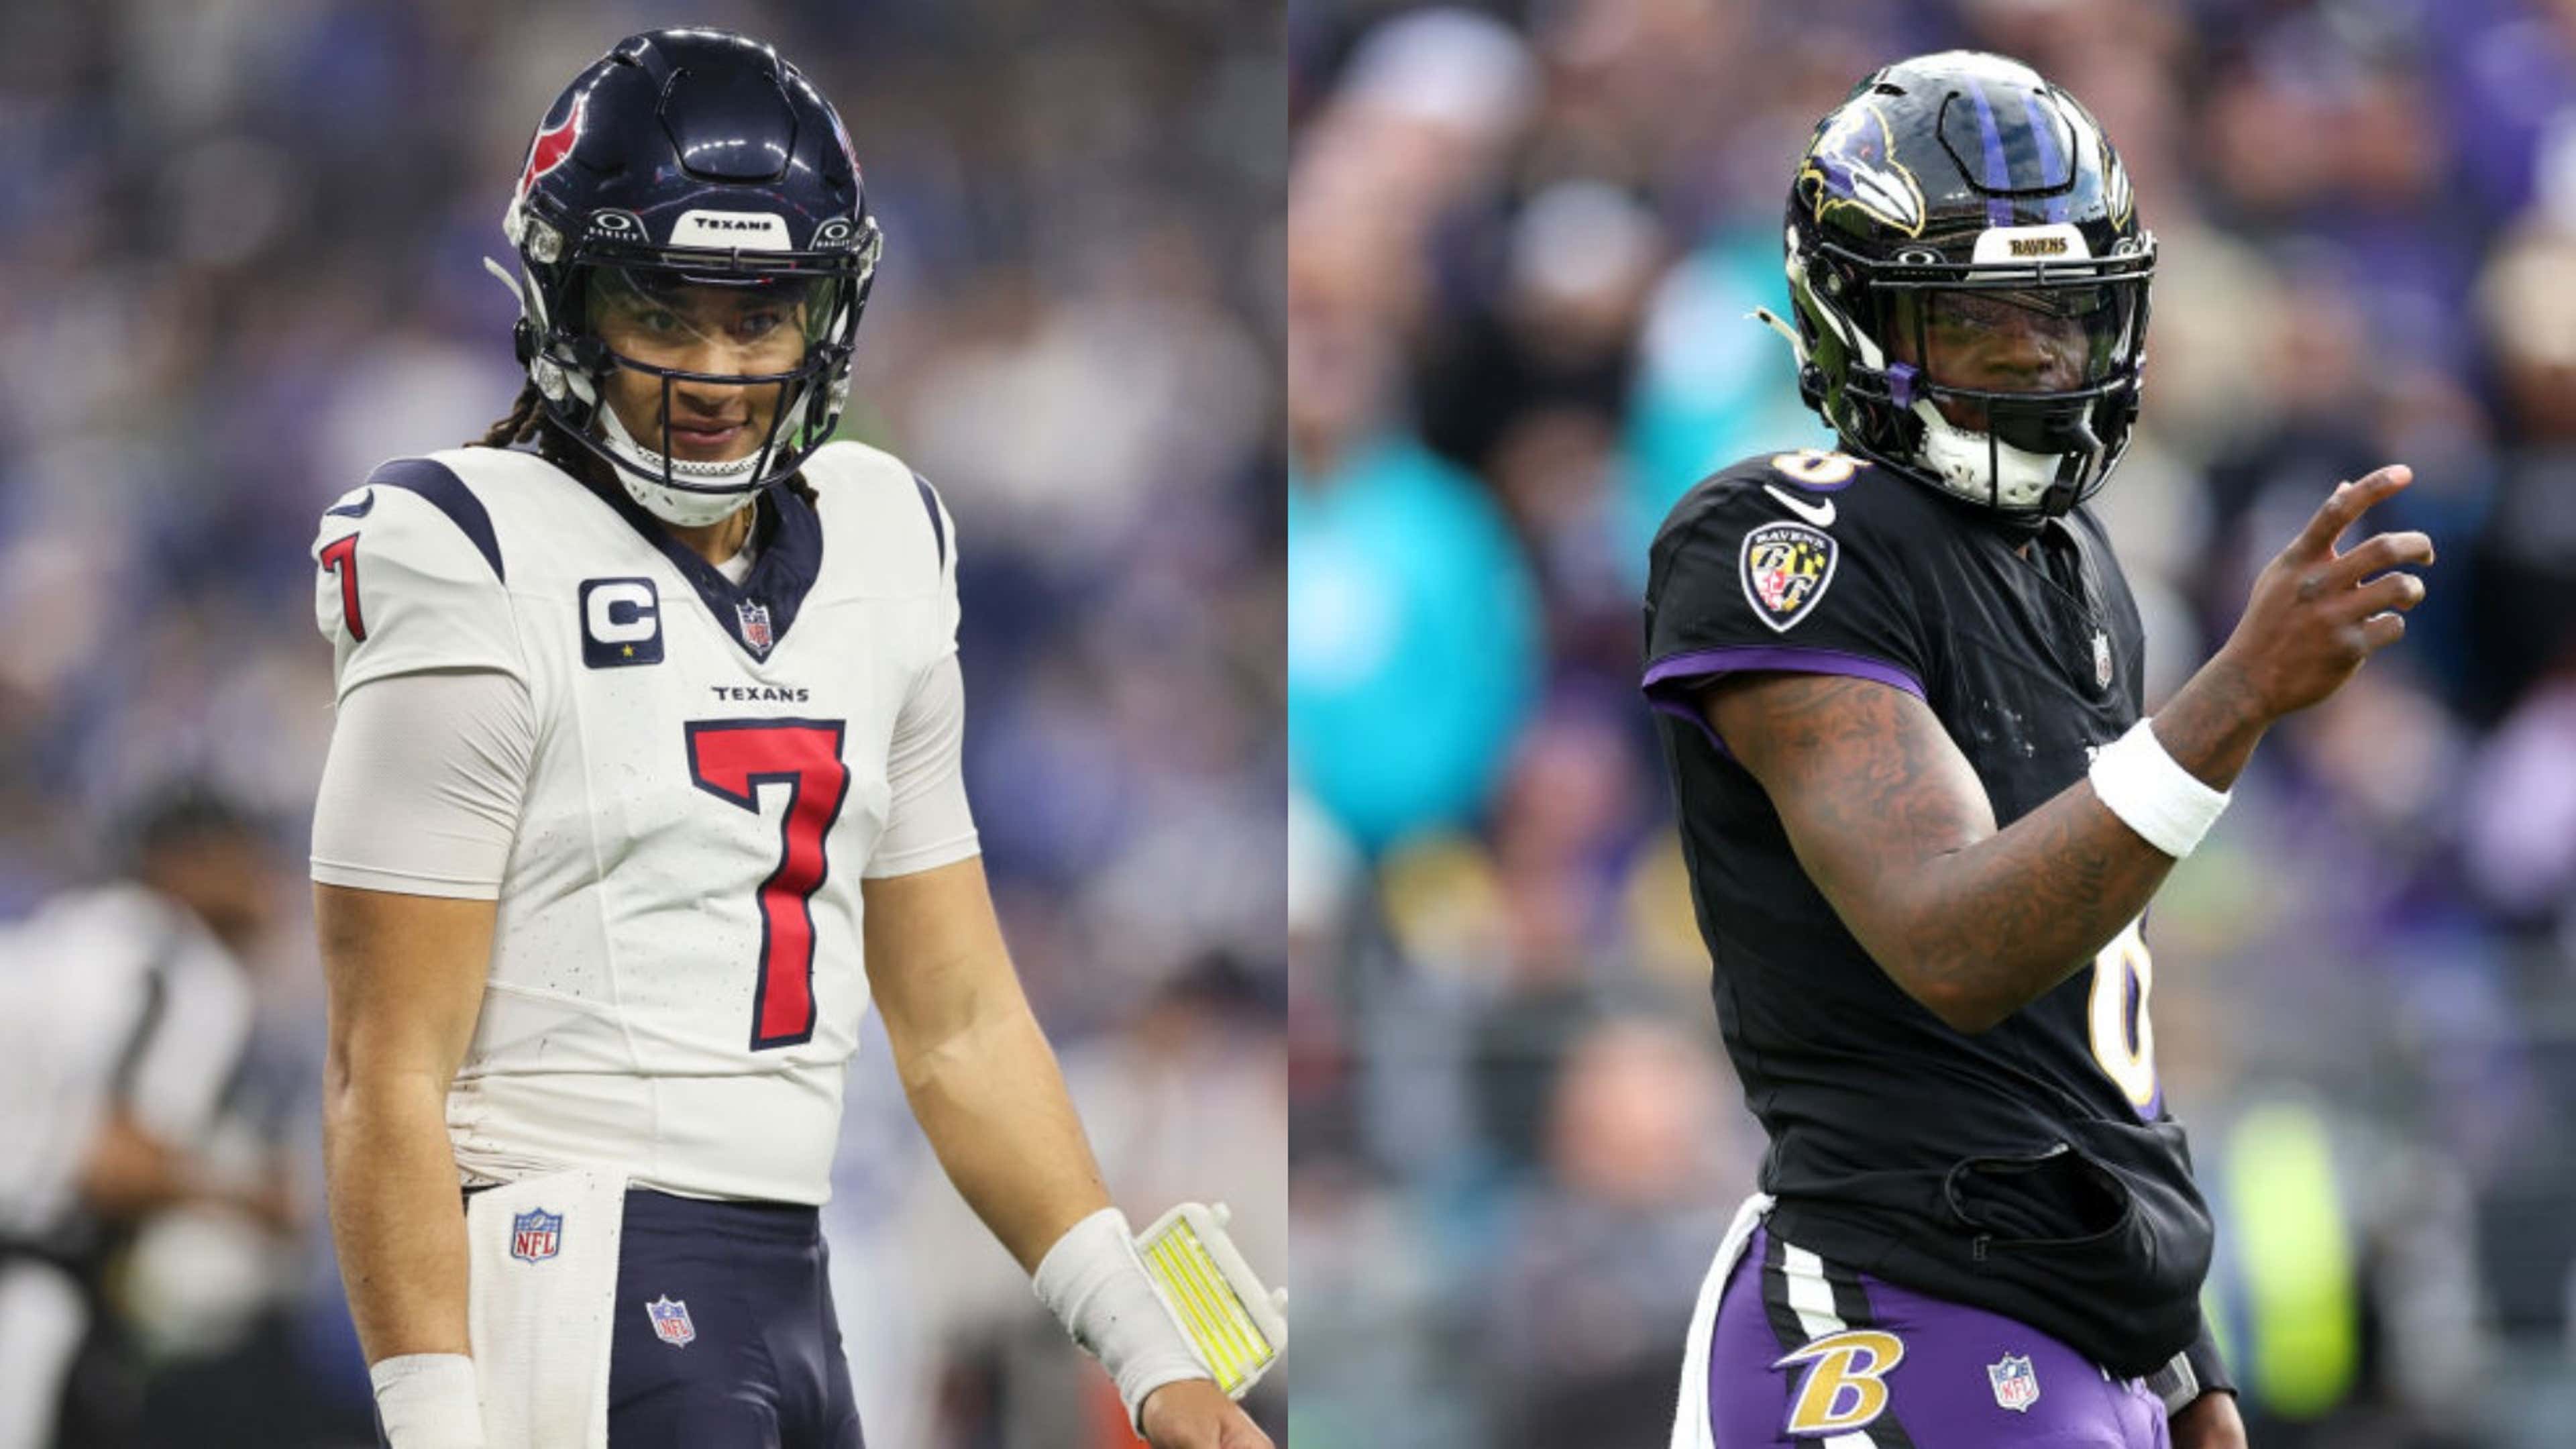 NFL playoffs: ESPN's most-viewed game ever was Texans vs. Ravens